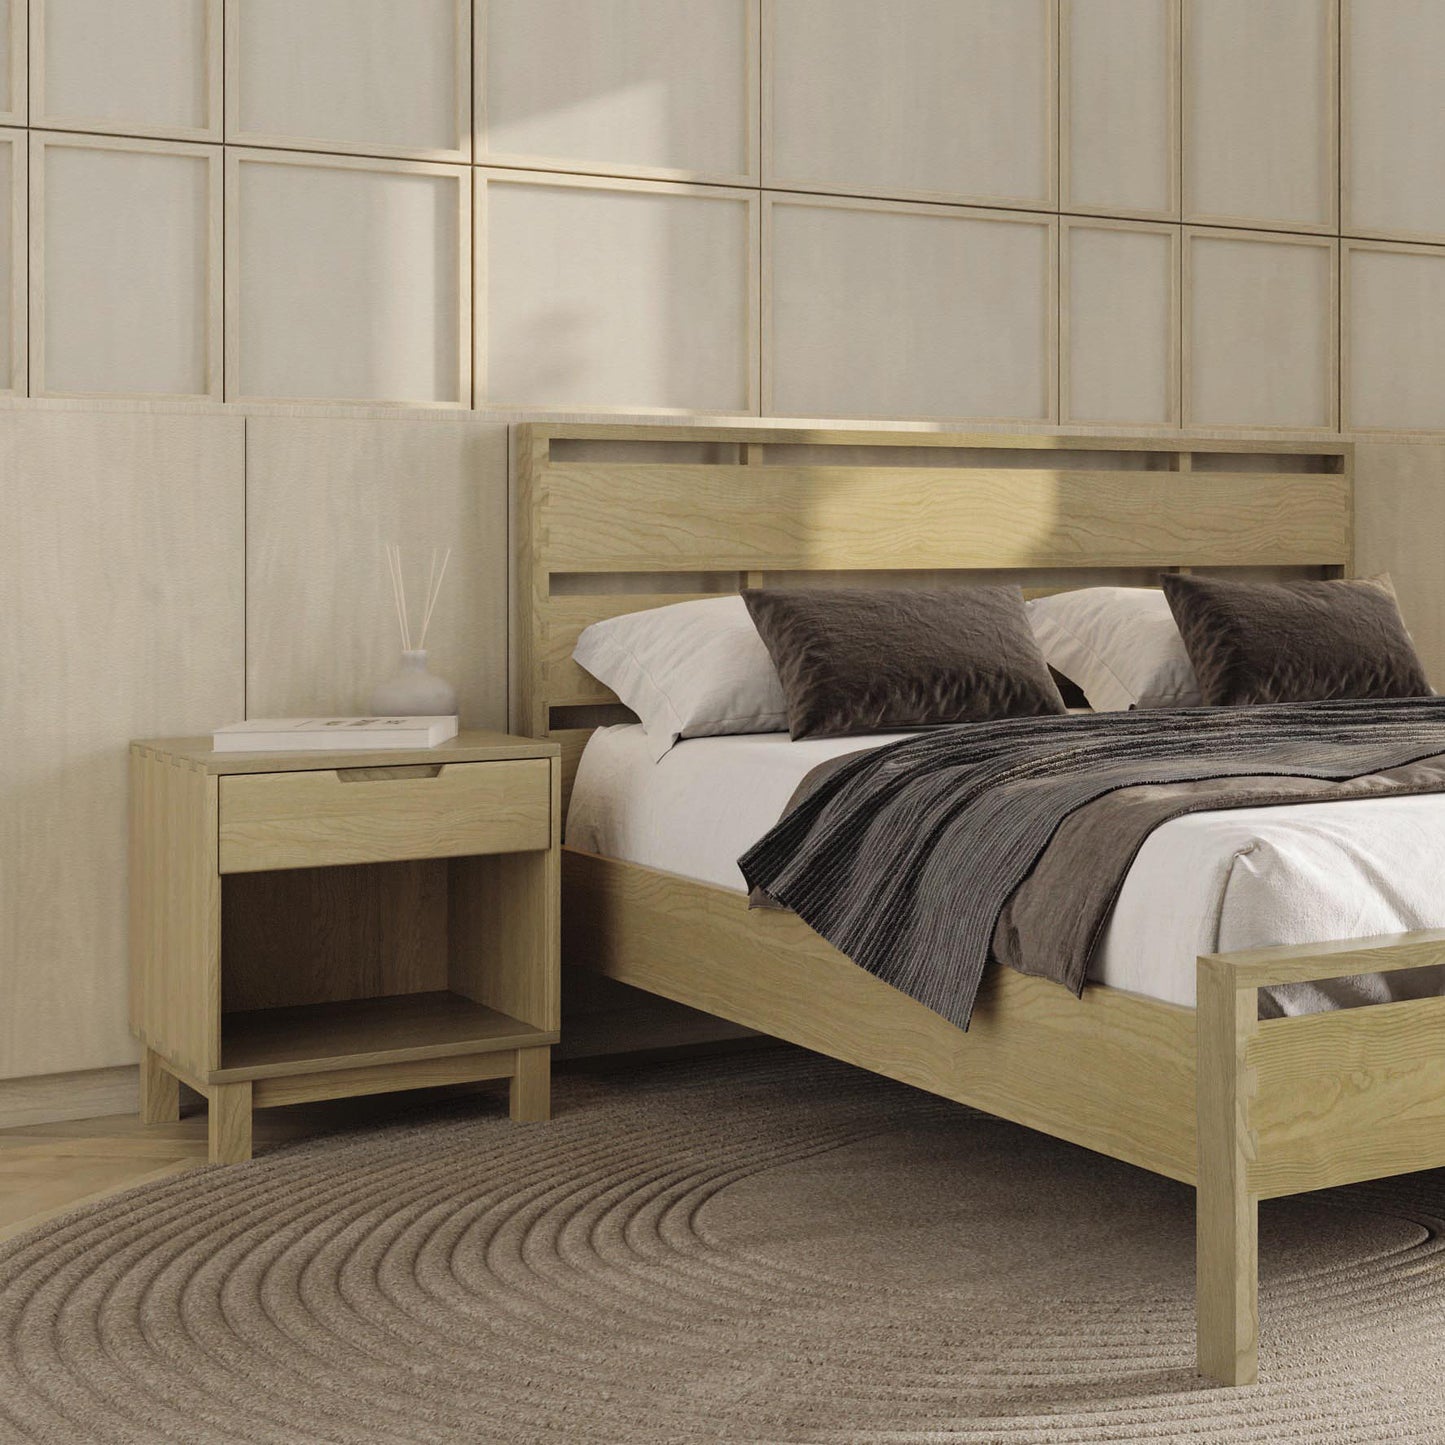 A bedroom with a solid oak hardwood bed and a Copeland Furniture Oslo 1-Drawer Enclosed Shelf Nightstand in a wood finish.